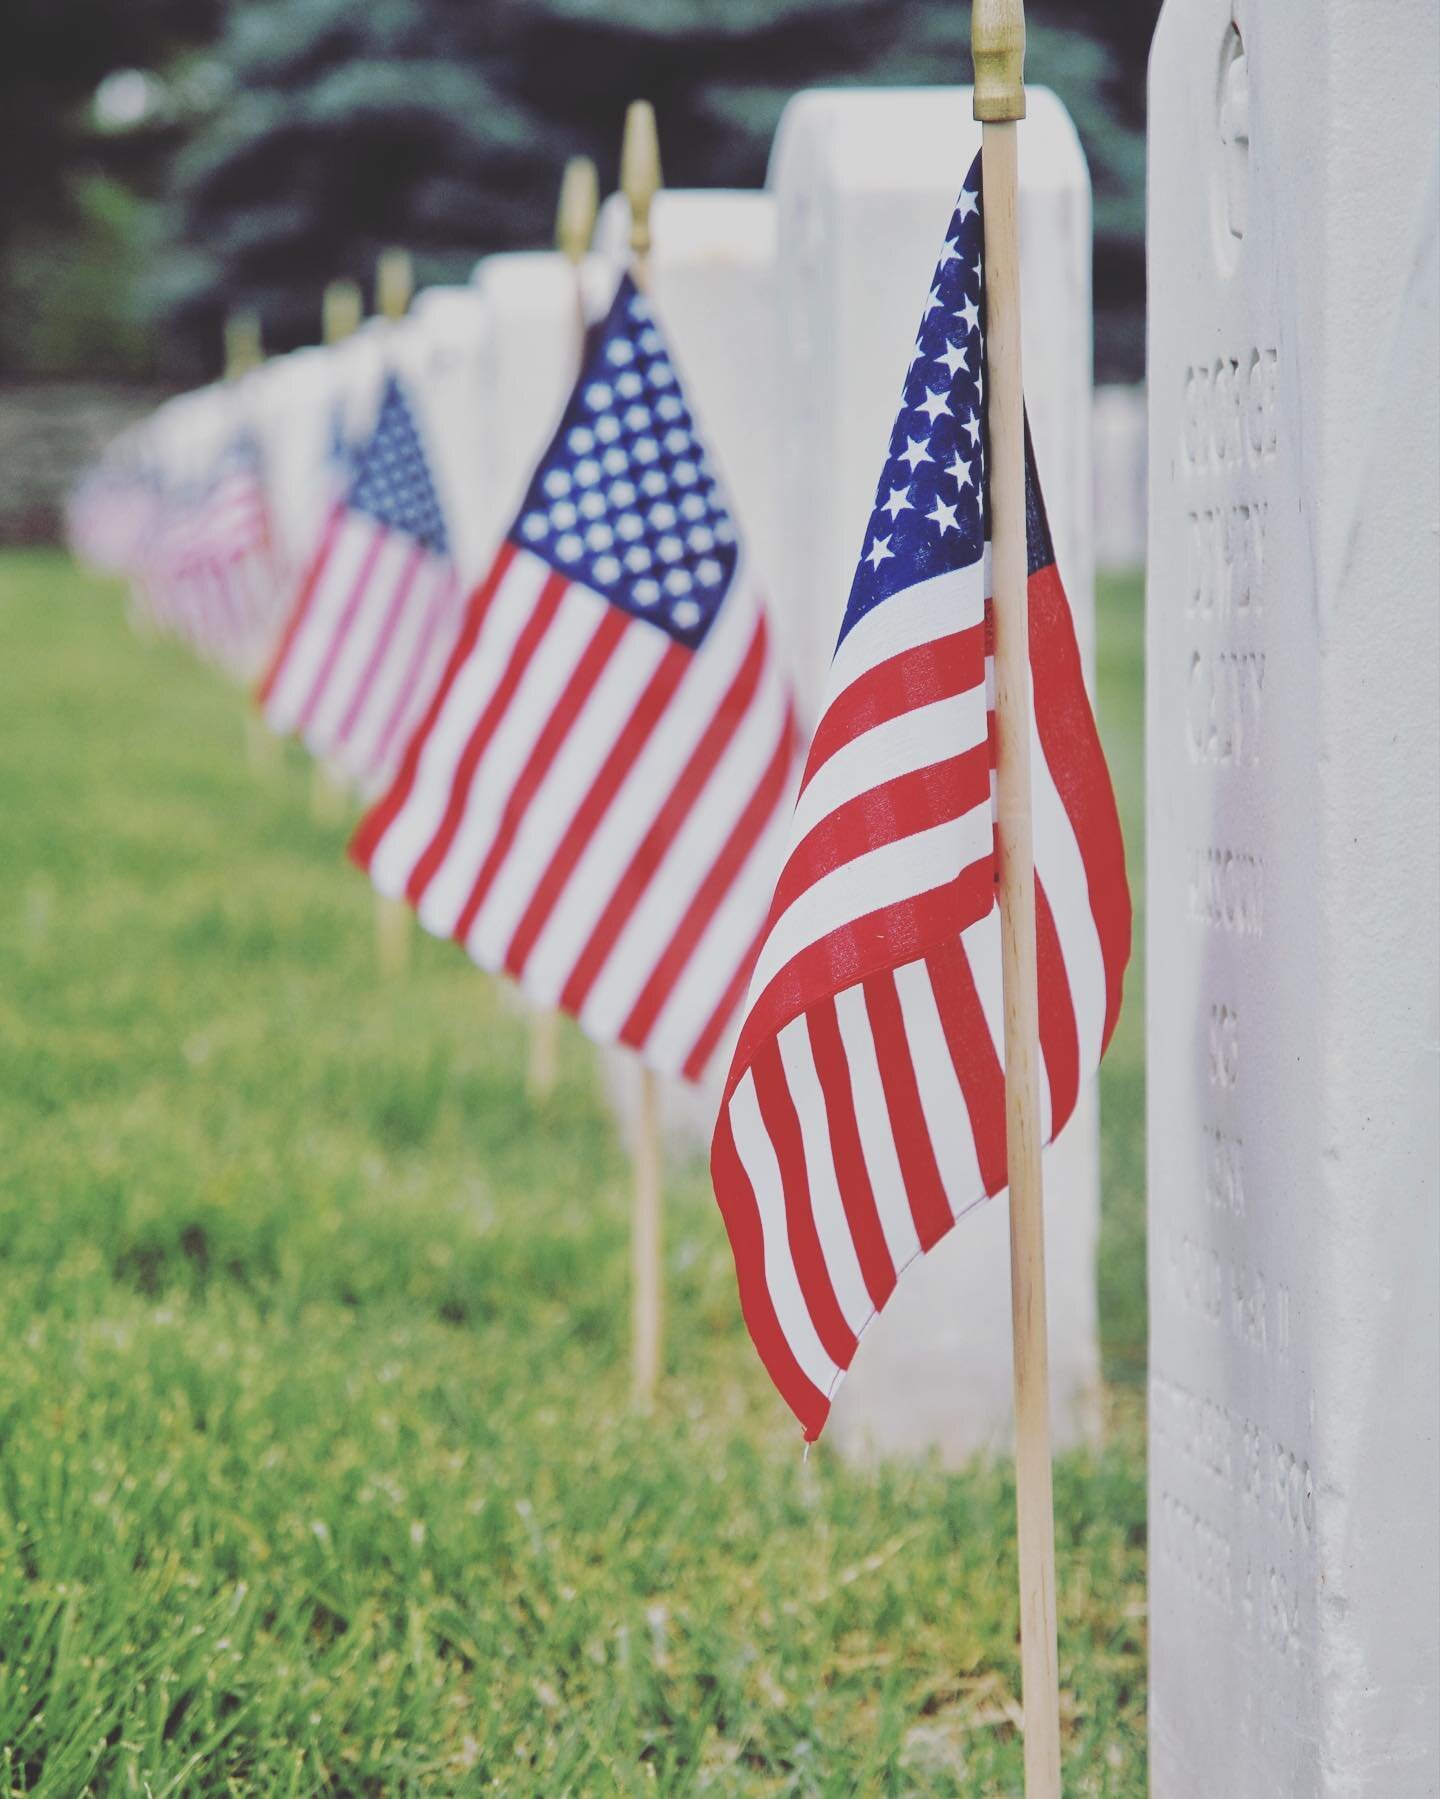 To those who served and sacrificed for our country, we remember you on this day!

Sending our love to each and every family!

#memorialday #usforces #military #america #homeofthebrave #freedom